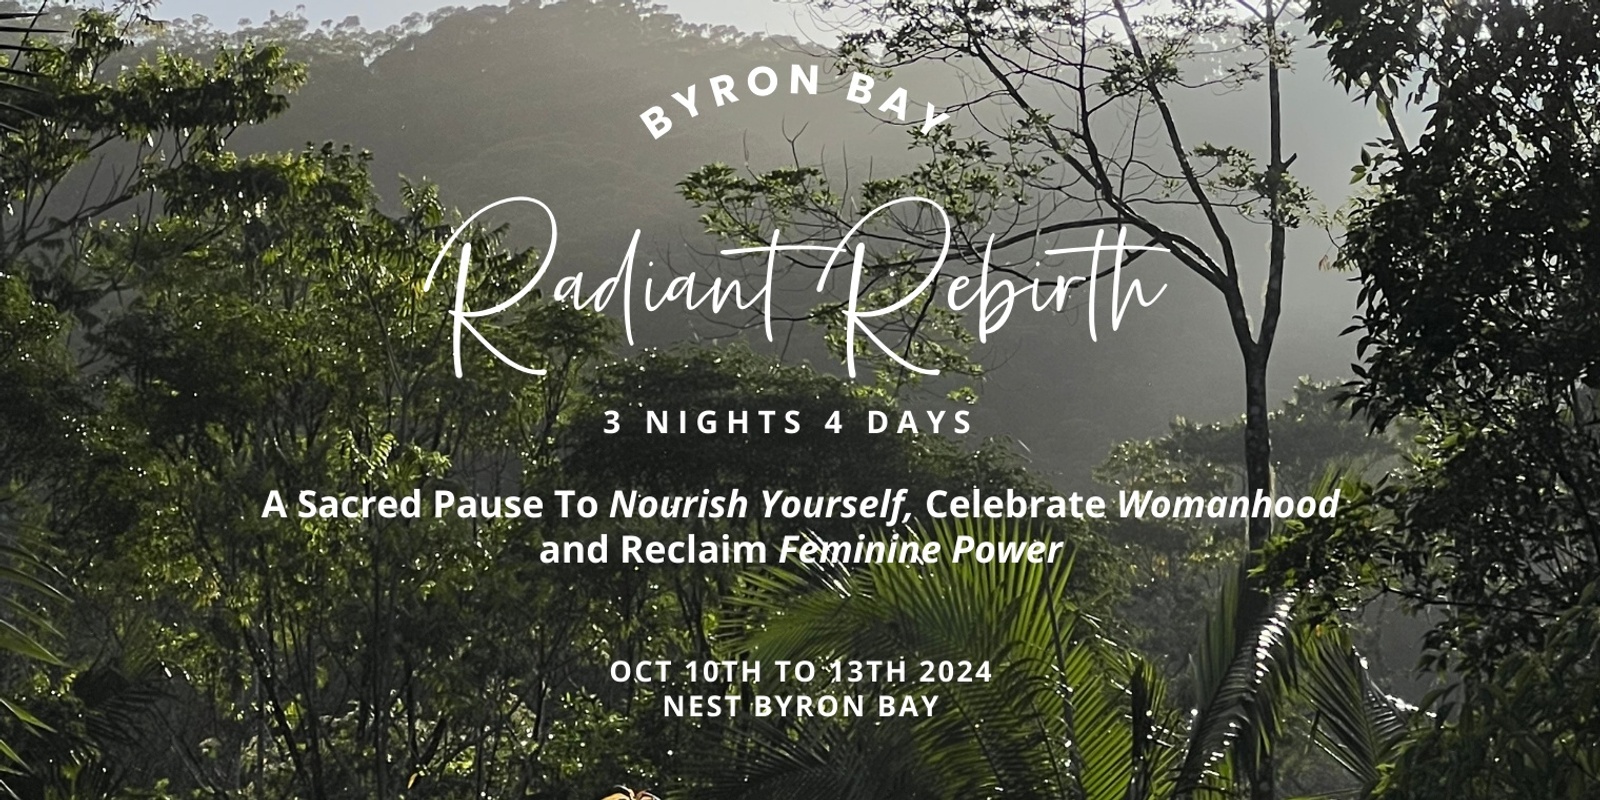 Banner image for Radiant Rebirth - A 4-Day Retreat To Nourish Yourself, Celebrate Womanhood and Reclaim Feminine Power